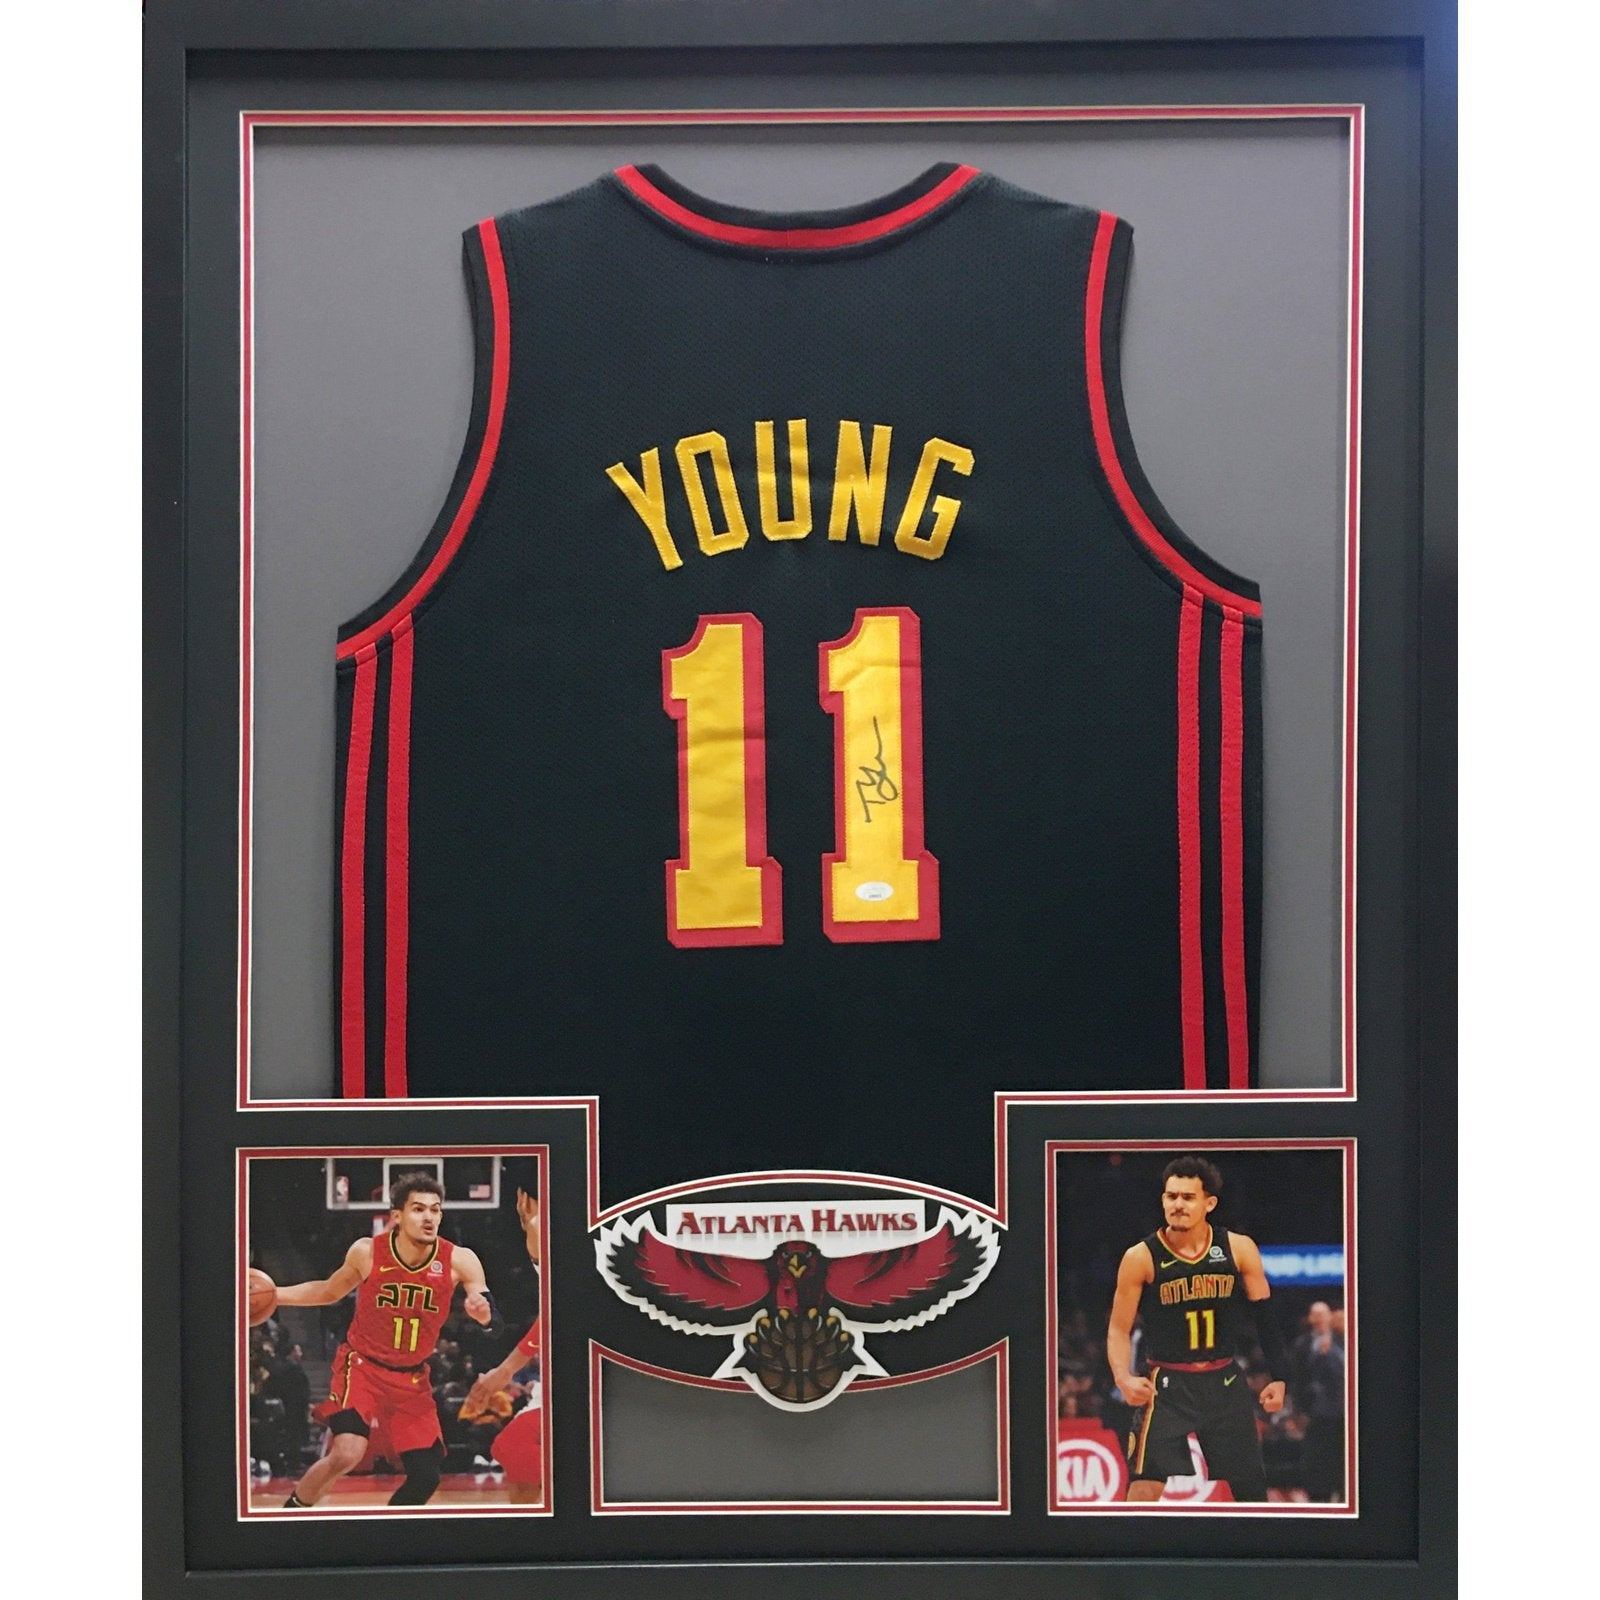 Hawks trae young signature jersey shirt, hoodie, sweater, long